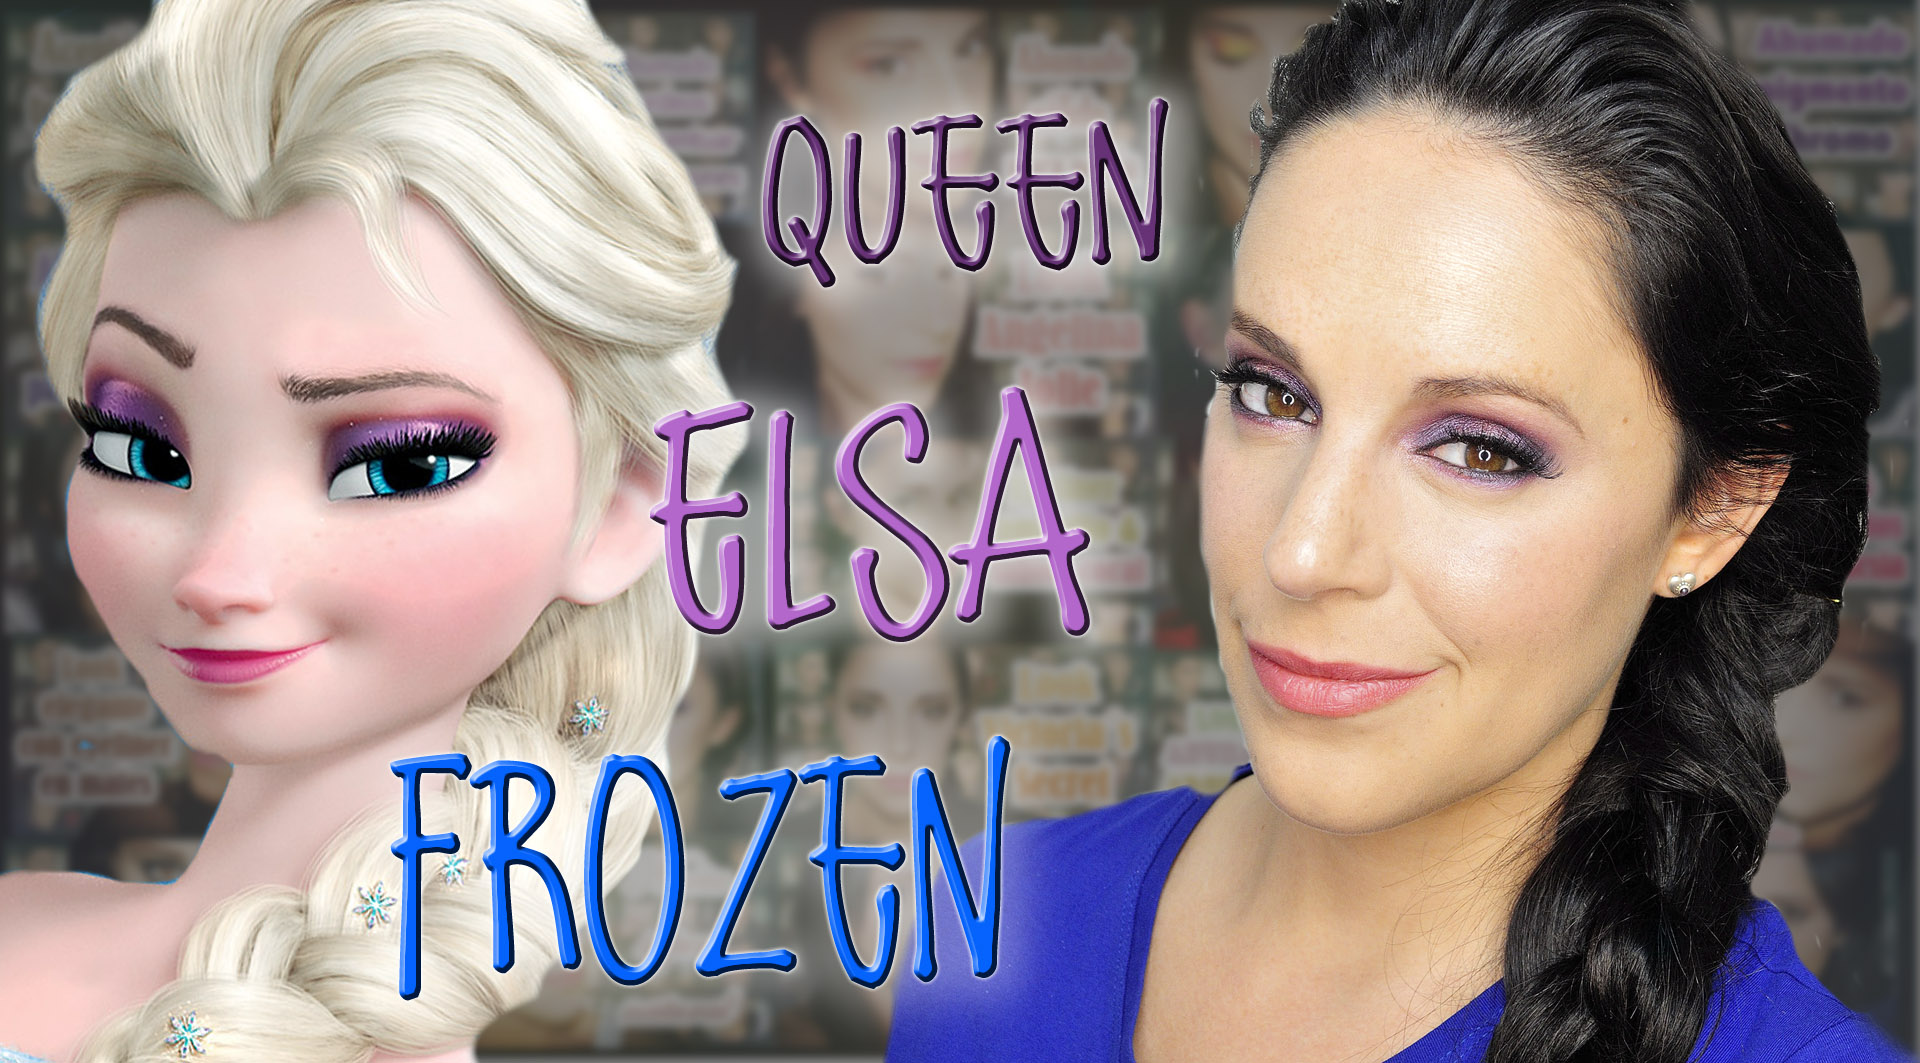 Queen Elsa From Frozen Makeup And Hairstyle Silvia Quiros